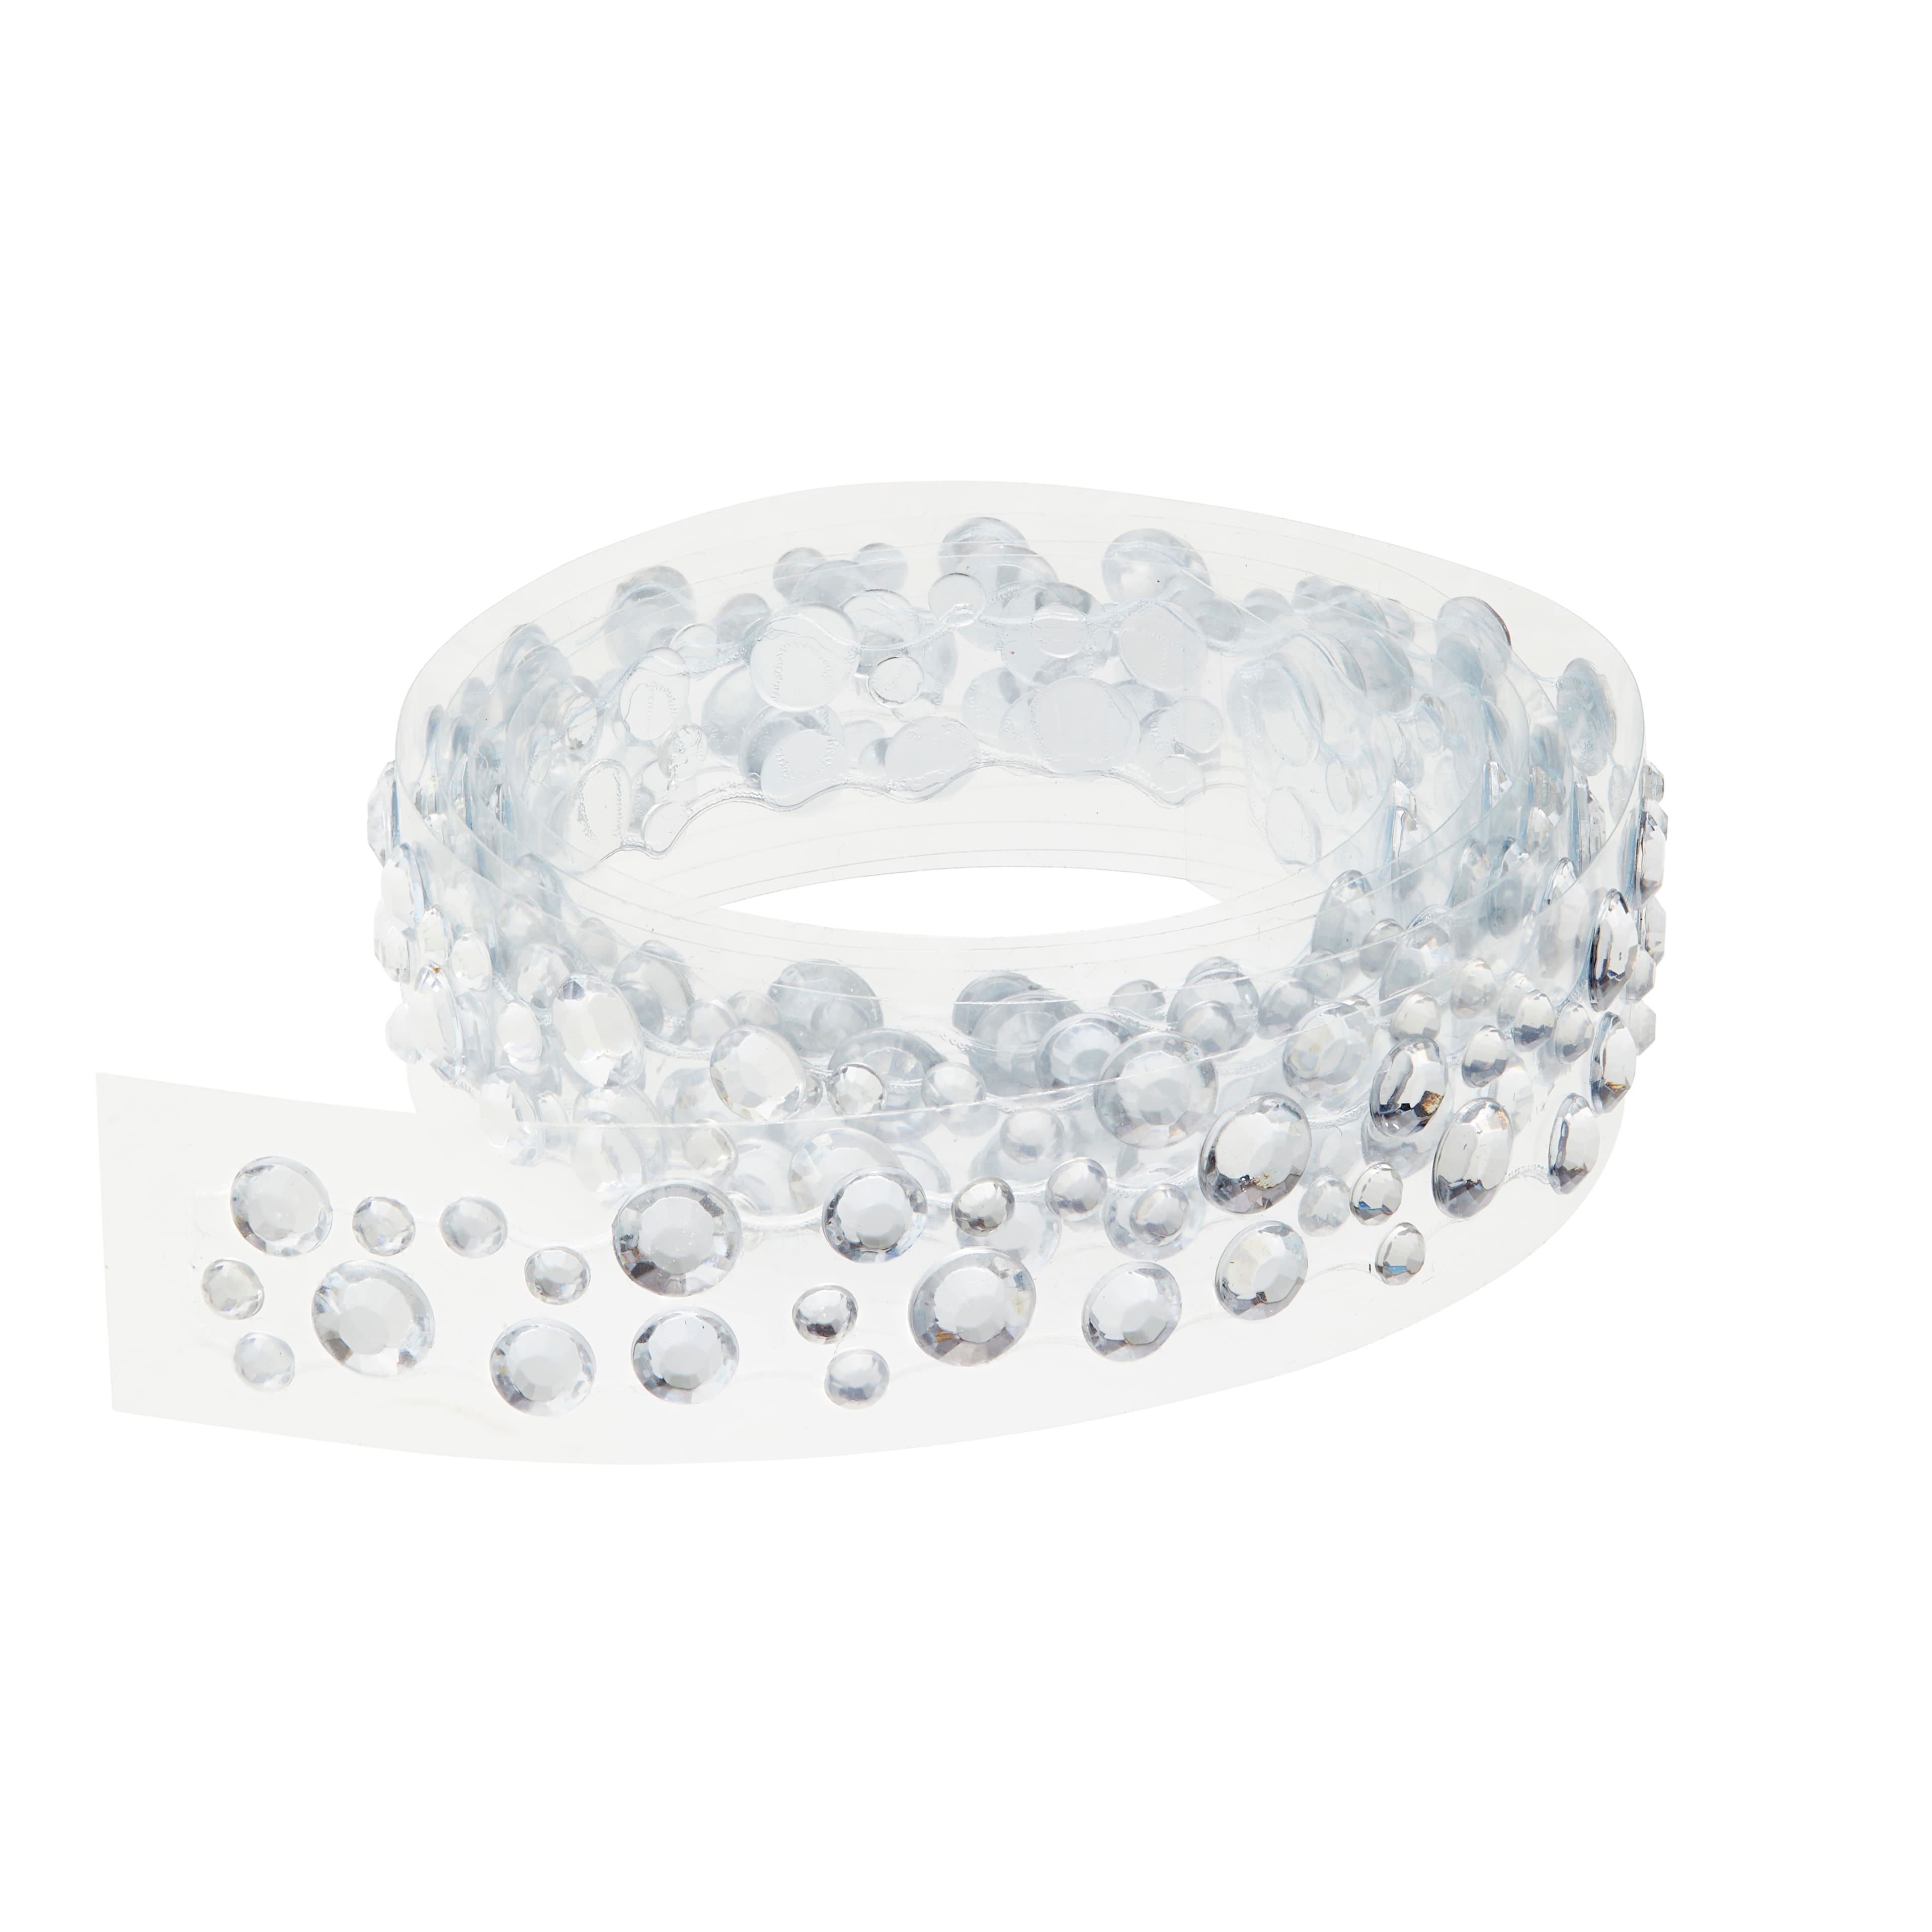 Recollections™ Bling on a Roll™ Clear Gemstones and Pearls